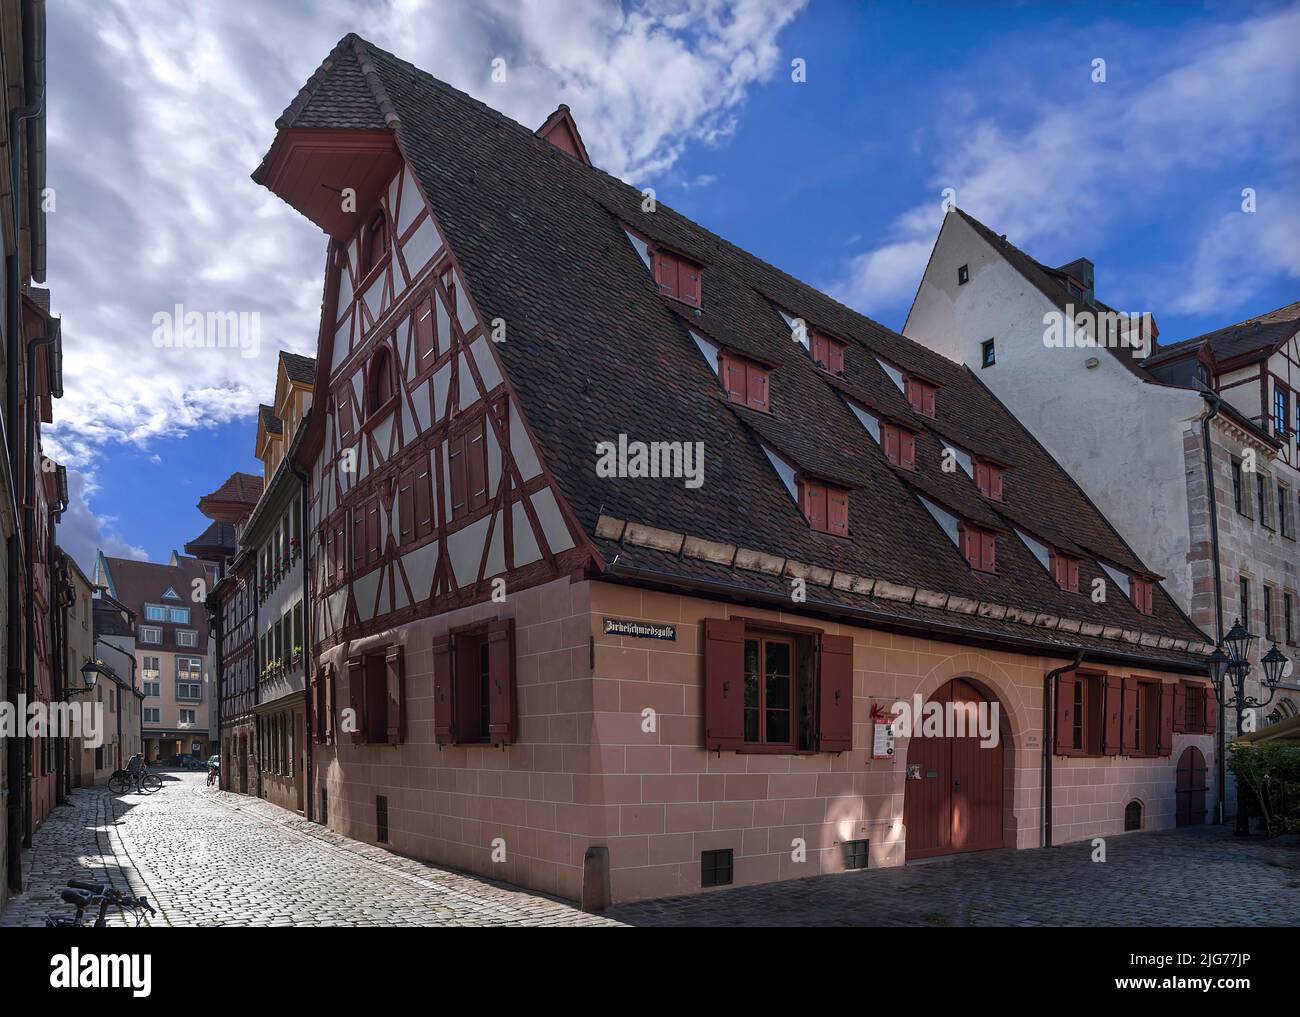 Historic half-timbered house, now a cultural barn, completely renovated by the Friends of the Old Town, Zirkelschmiedsgasse 30, Nuernbnerg, Middle Stock Photo